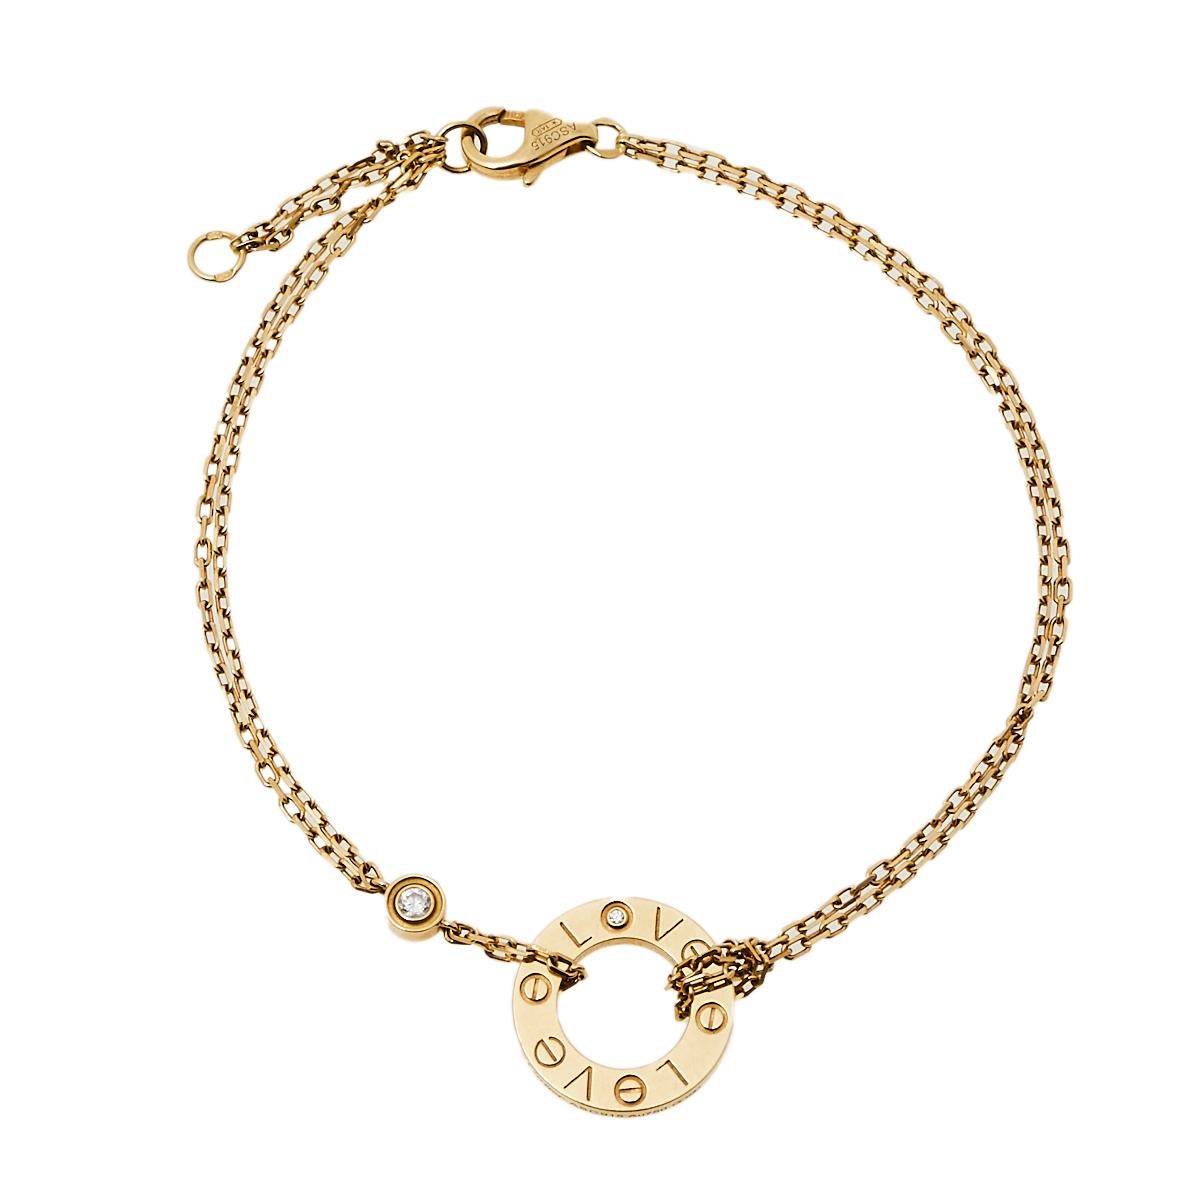 We fell in love with this Cartier Love bracelet at first glance. Look at its gorgeous yet subtle accents and picture how it will beautifully sit on your wrist and charm your peers. The creation is crafted from 18K yellow gold featuring double chains